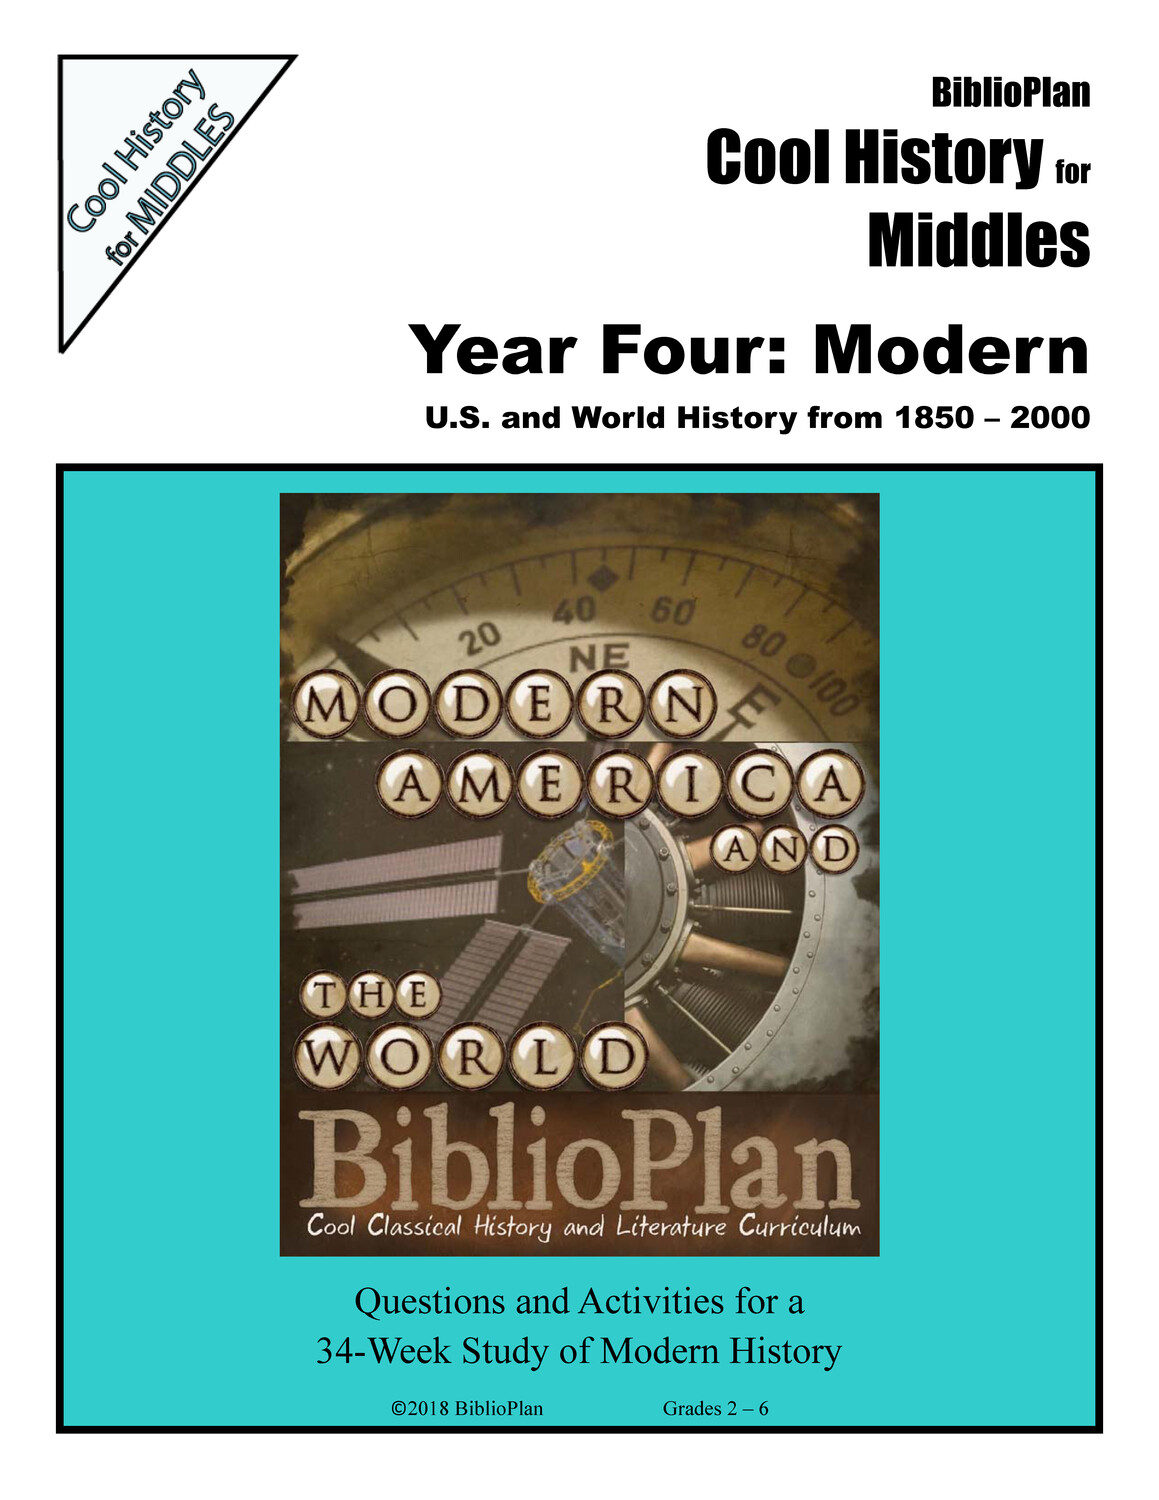 Modern Cool History for Middles Ebook